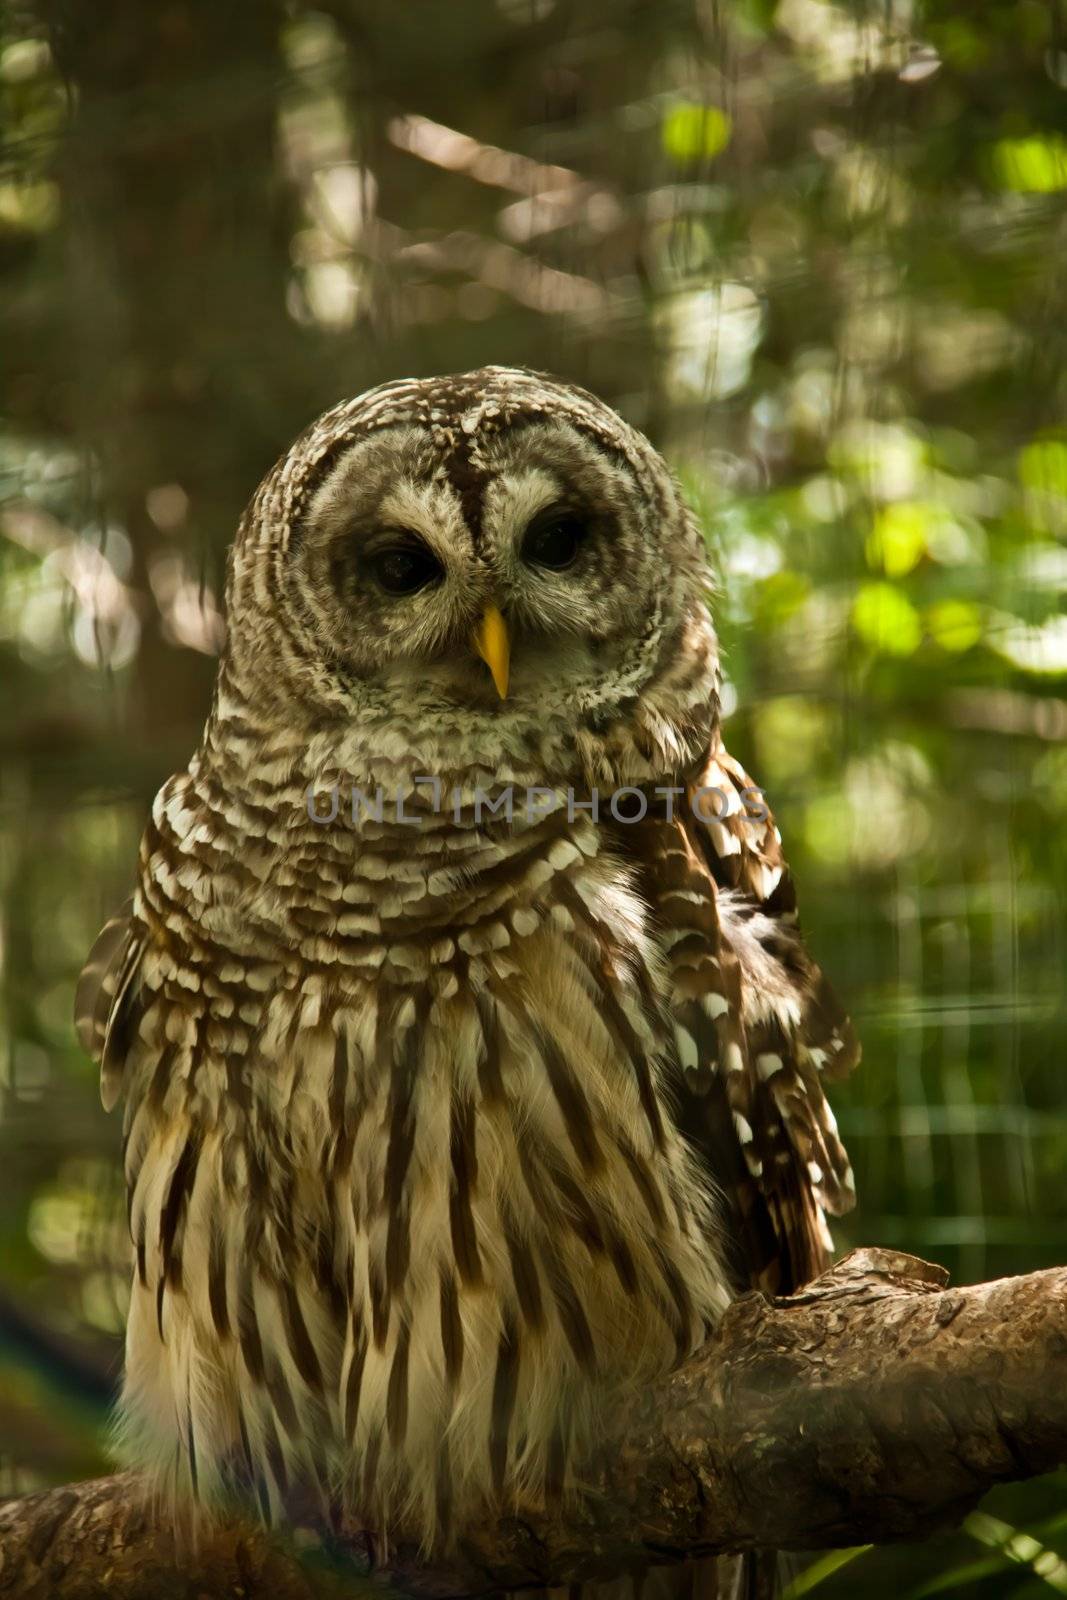 a Barred owl perched on a branch, staring.